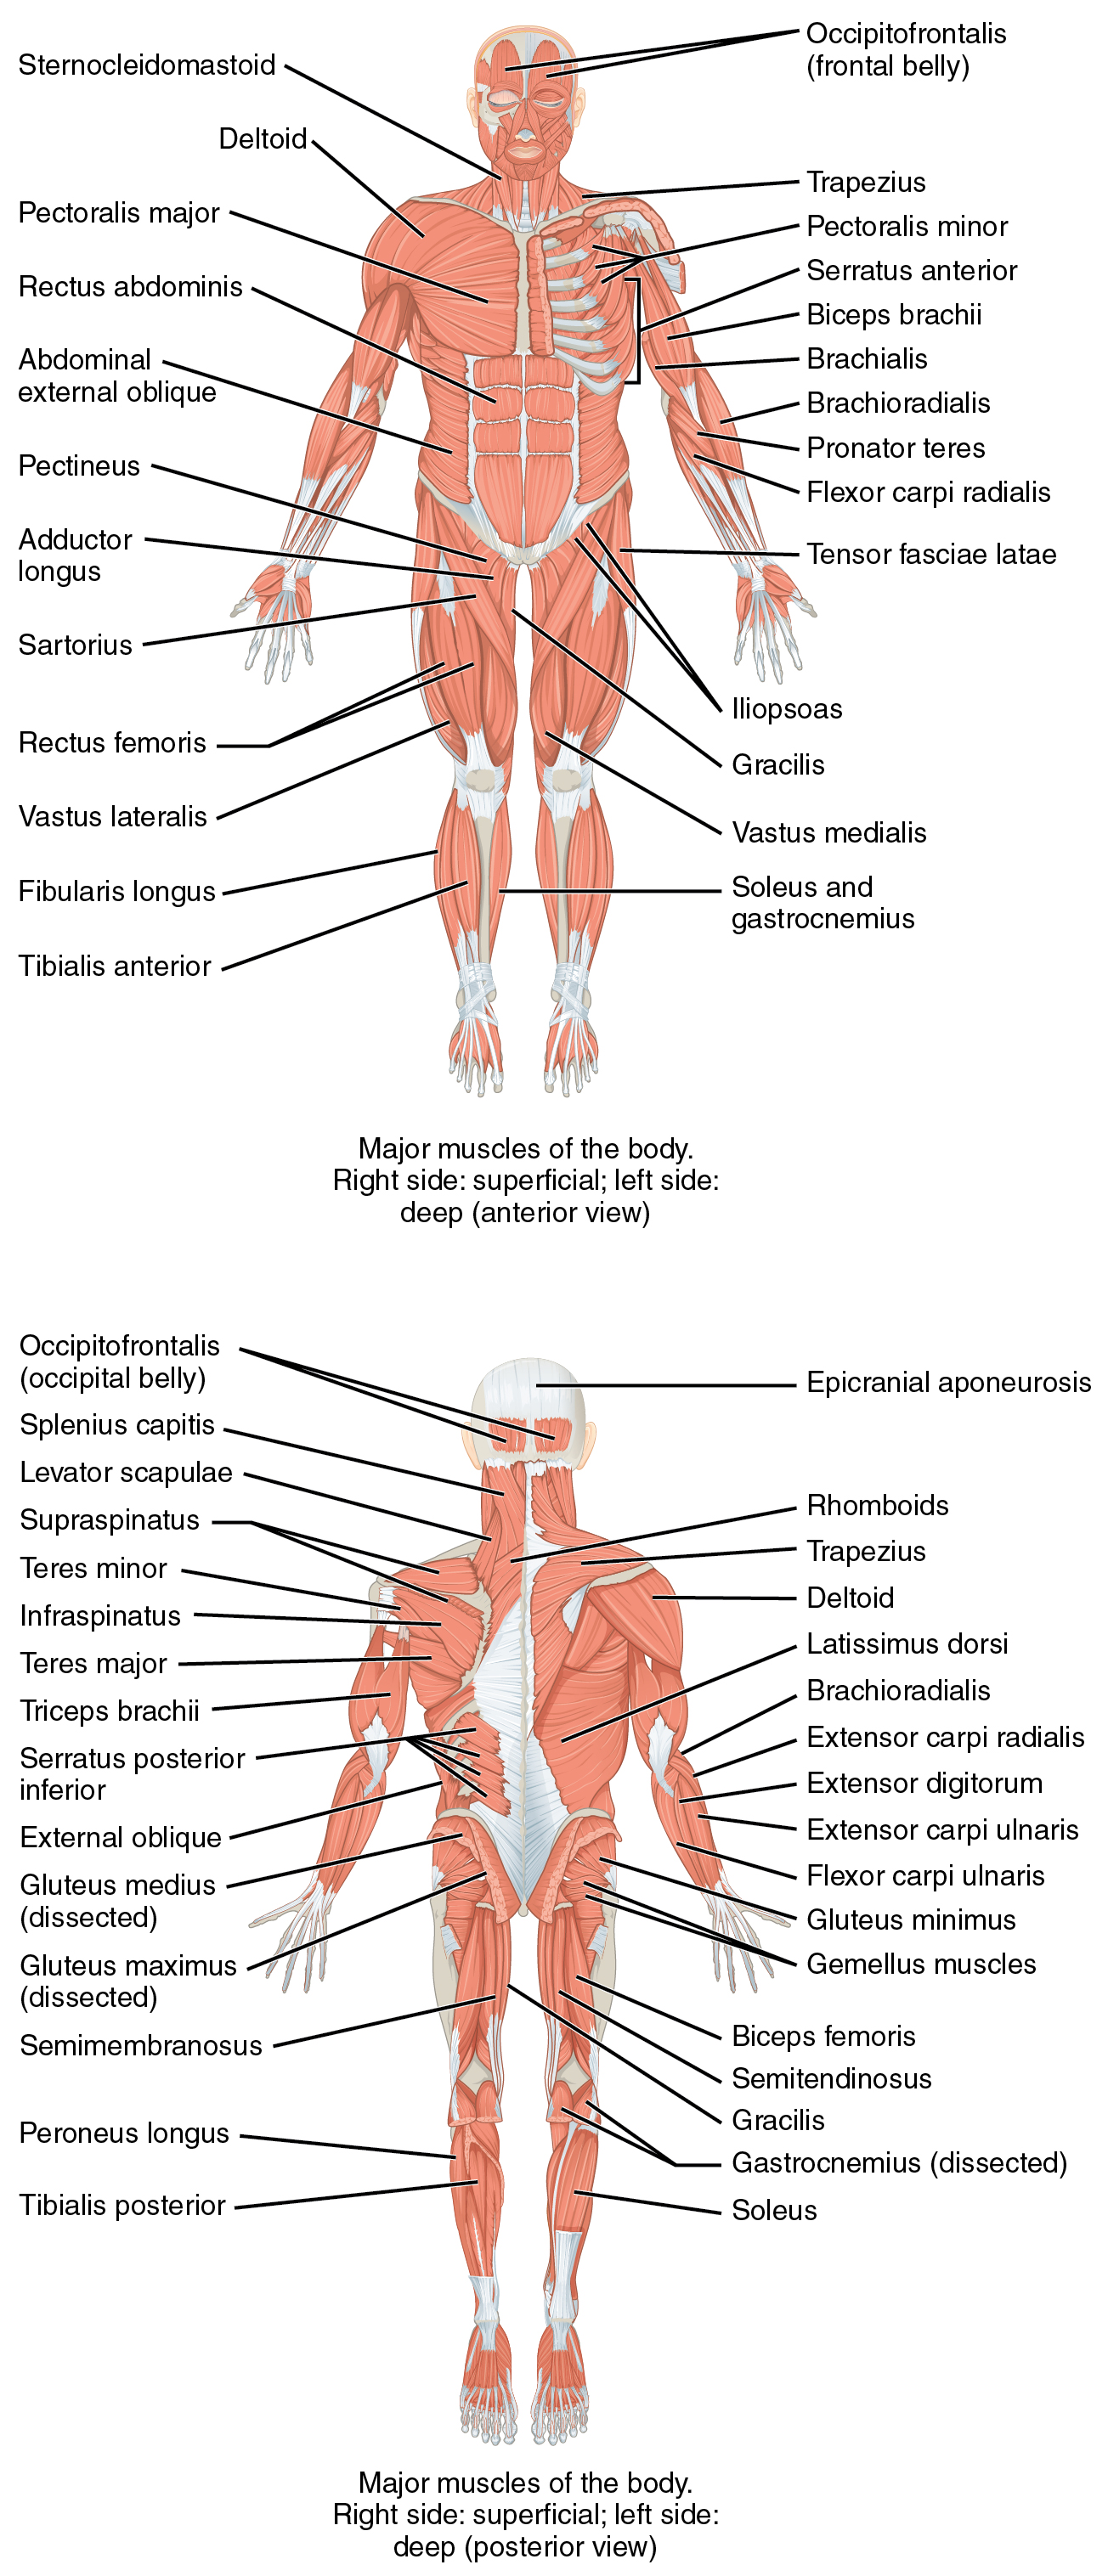 On the anterior and posterior views of the muscular system above, superficial muscles (those at the surface) are shown on the right side of the body while deep muscles (those underneath the superficial muscles) are shown on the left half of the body. For the legs, superficial muscles are shown in the anterior view while the posterior view shows both superficial and deep muscles.